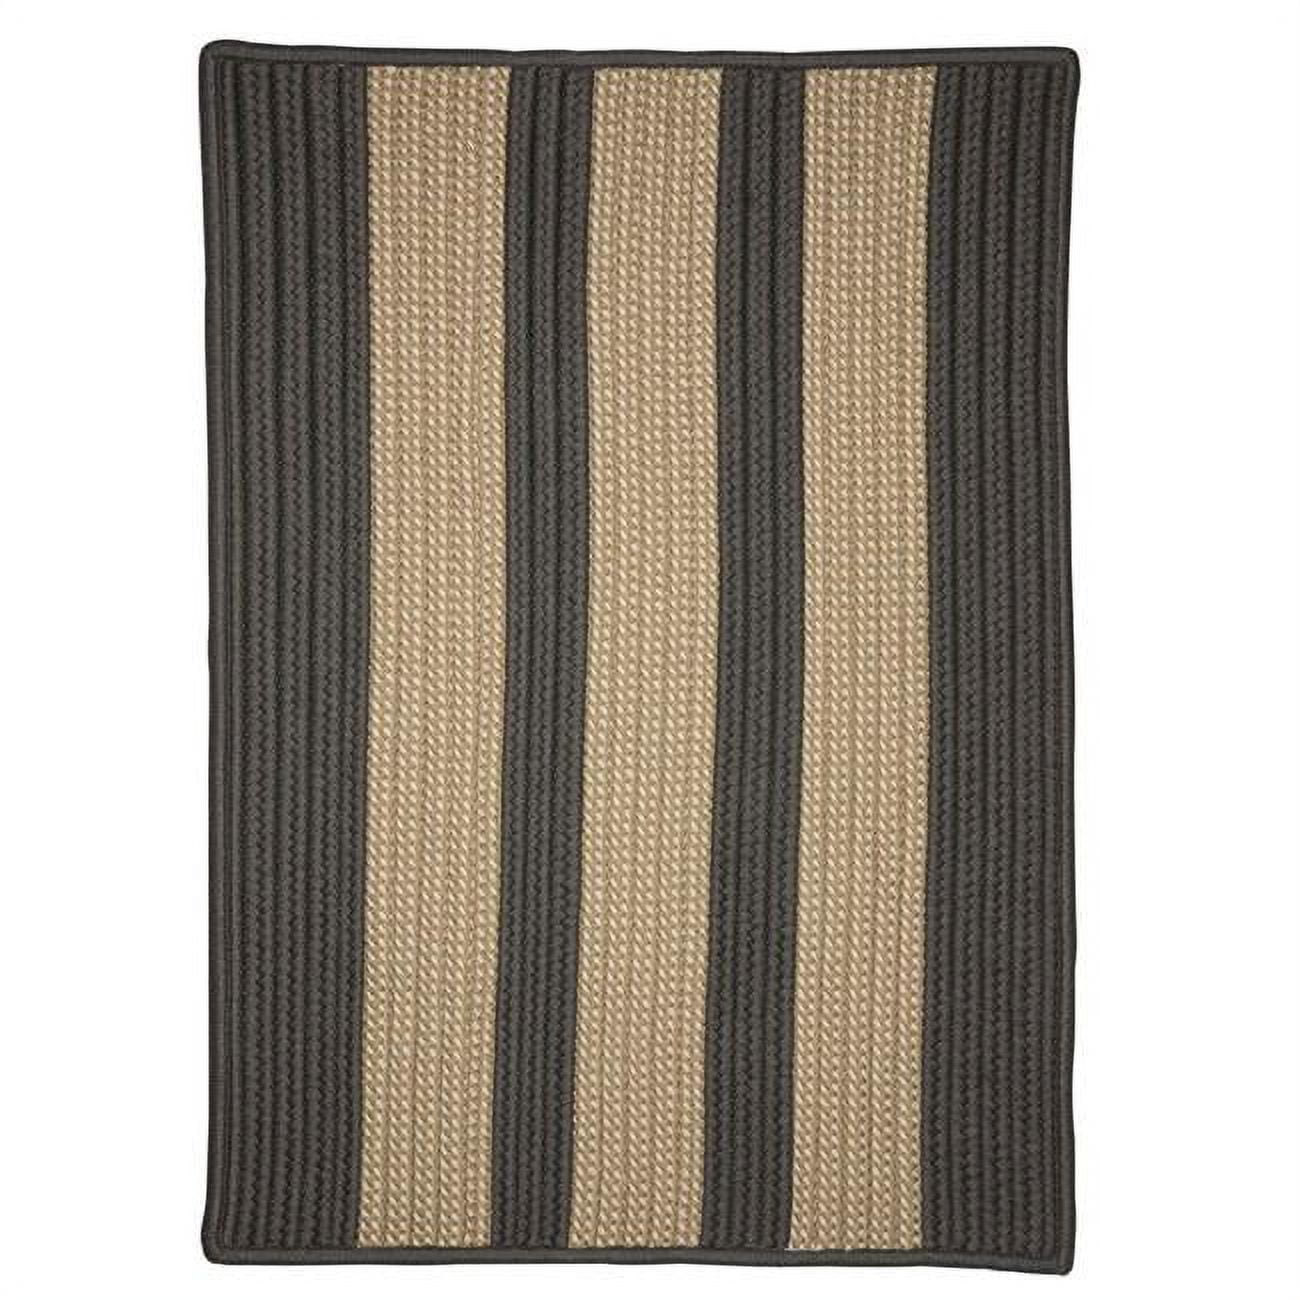 Bt29a015x015sx 15 X 15 In. Boat House Gray Chair Pad